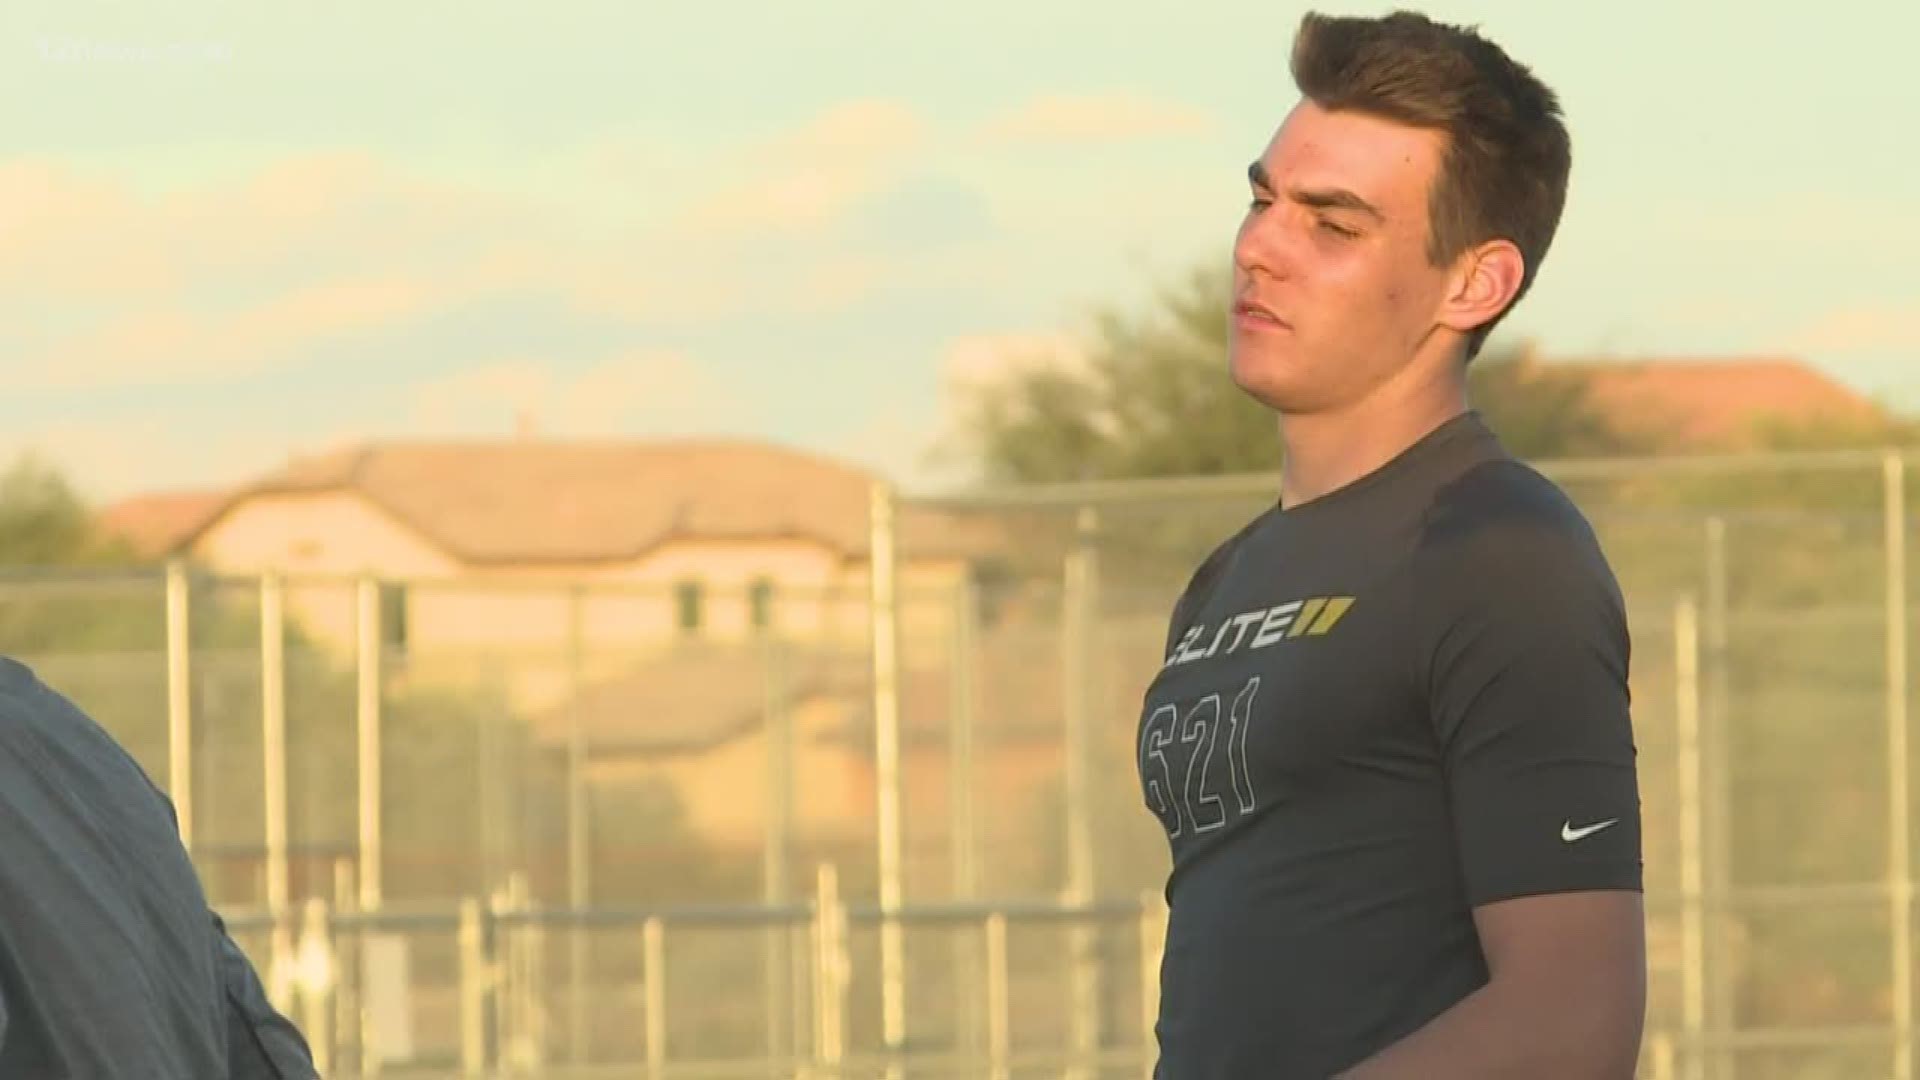 Pinnacle's QB is out because of a suspension, queue JD Johnson. With confidence in himself and from the team, Johnson is ready to win it all for Pinnacle.